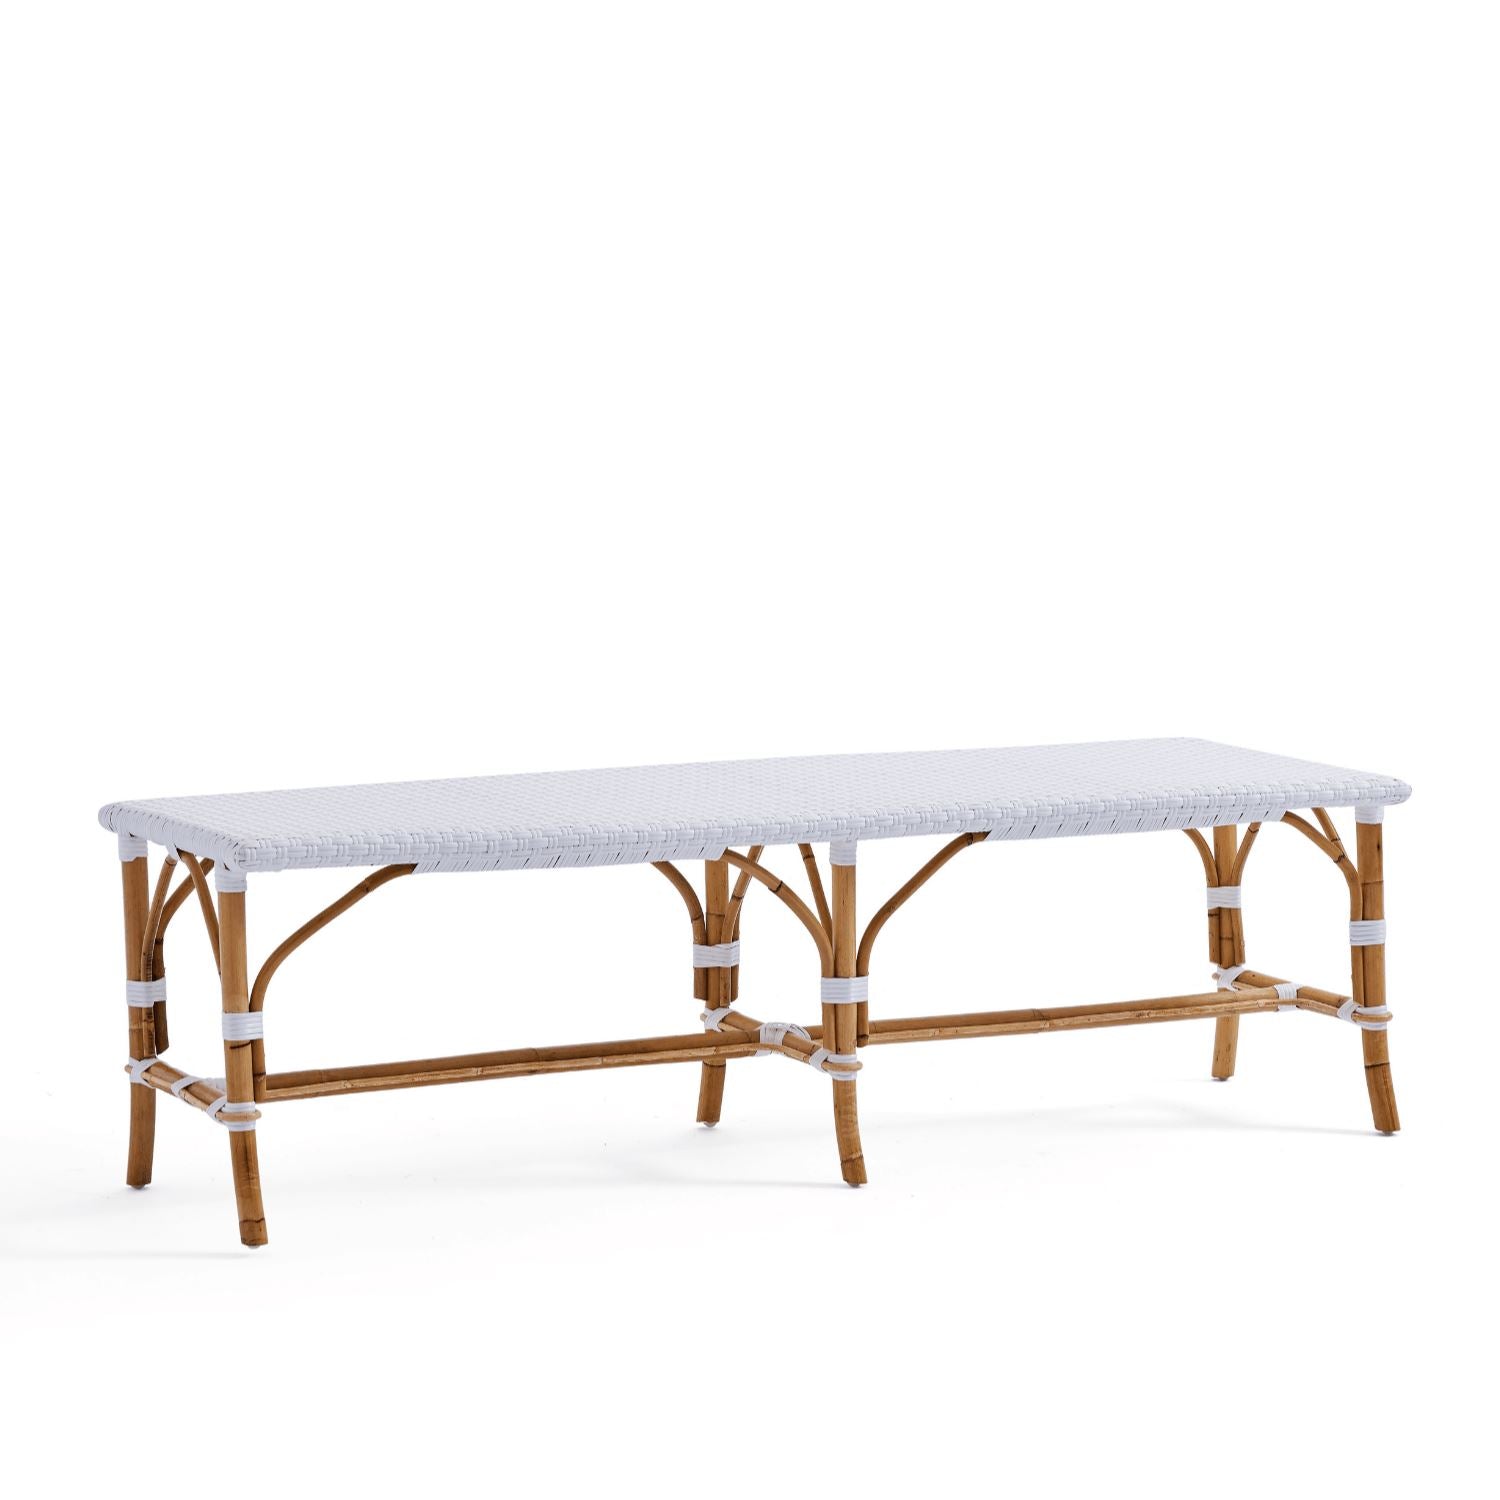 Lillyme Bench - Valyou 